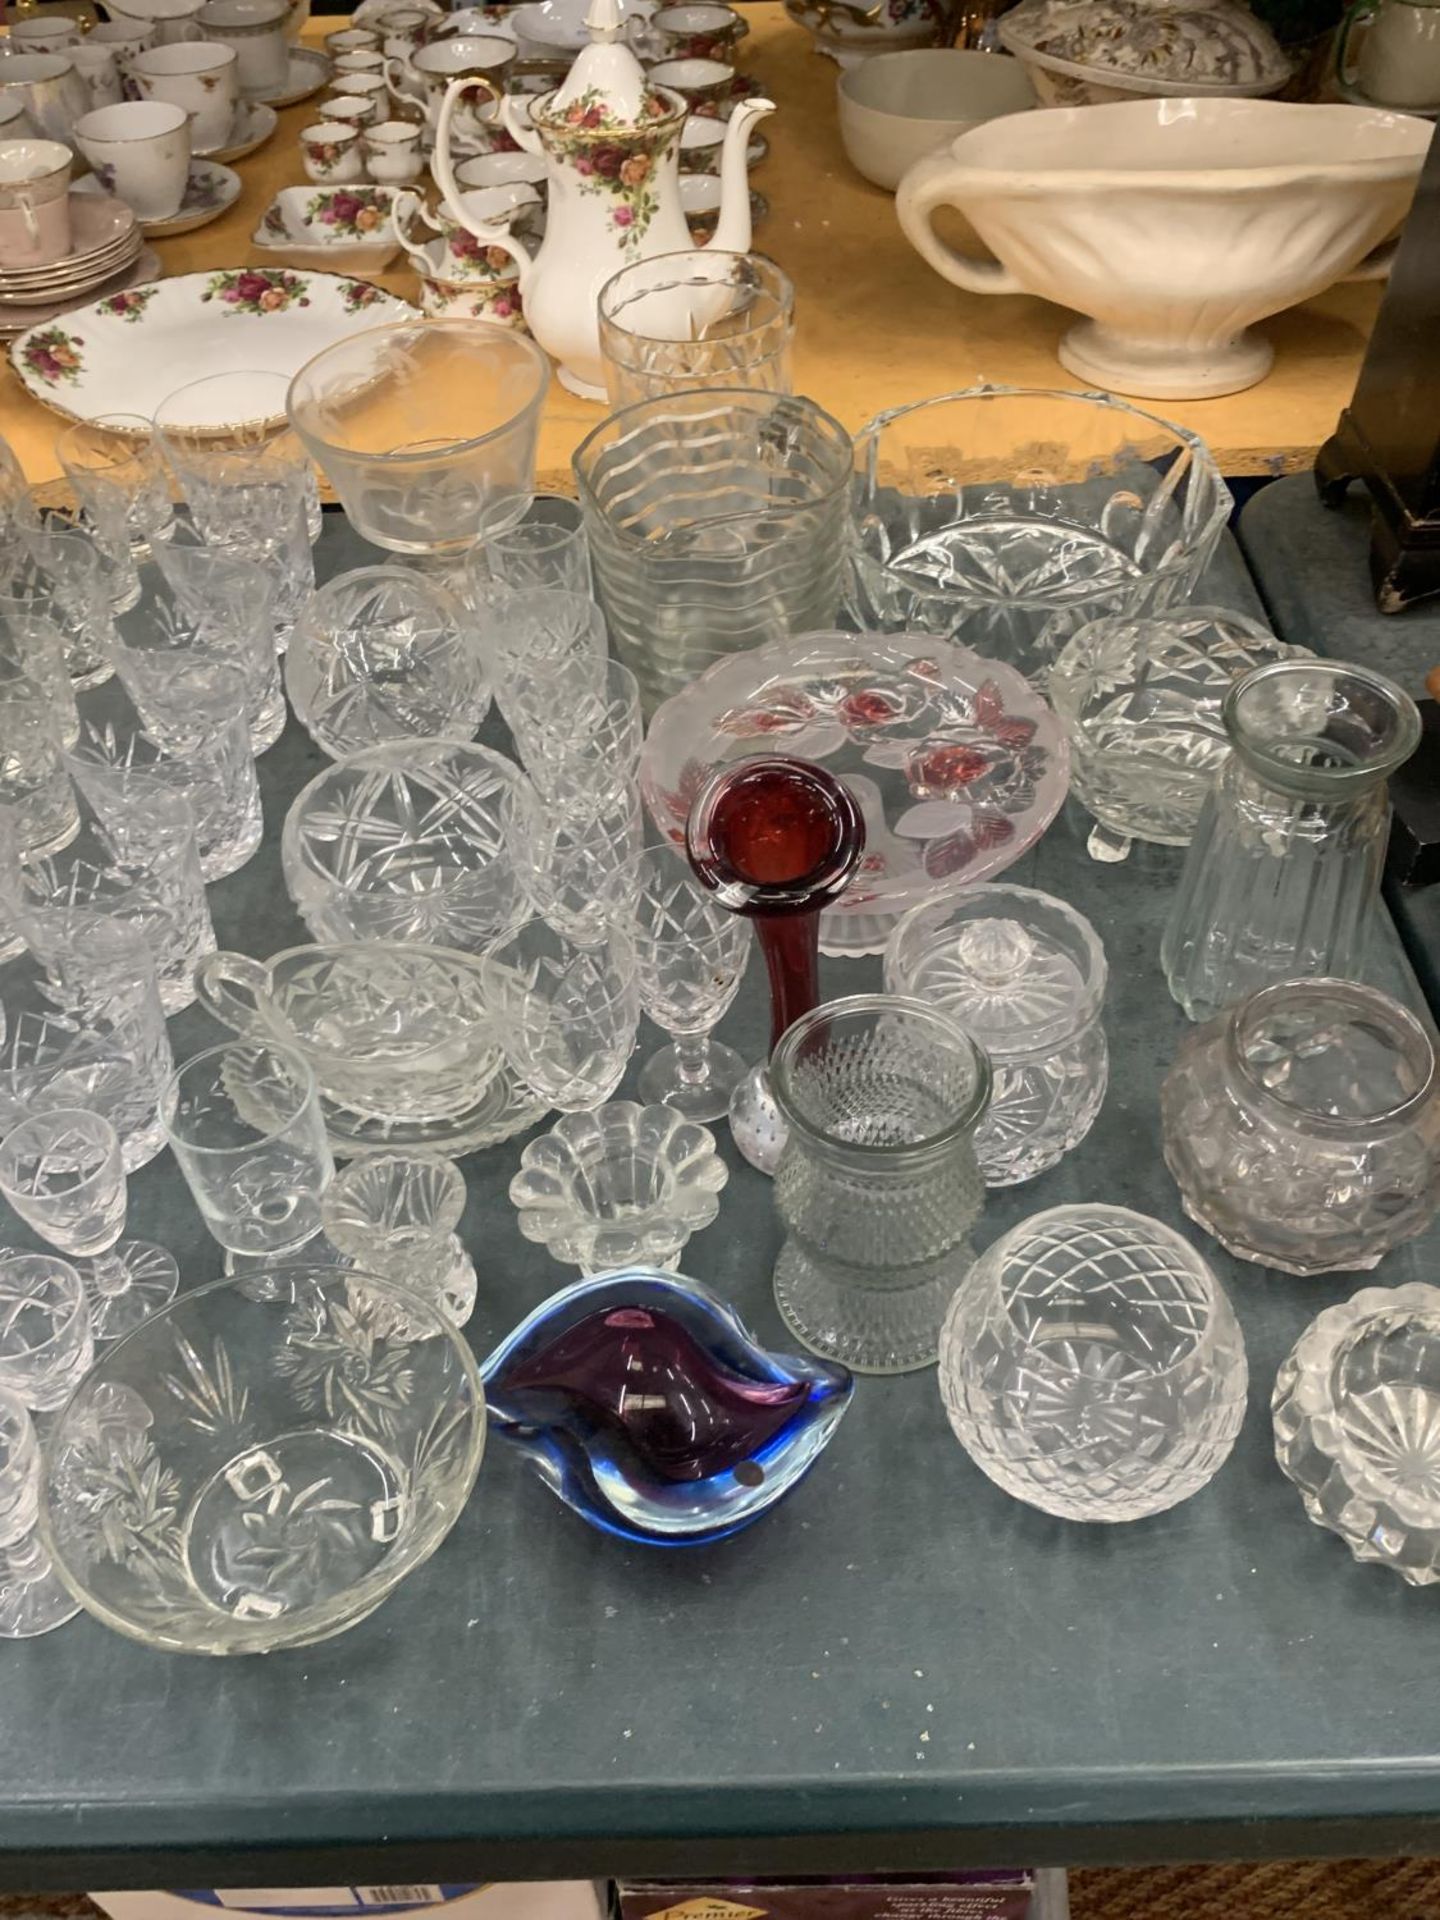 A LARGE QUANTITY OF GLASSWARE TO INCLUDE A DECANTER, JUGS, BOWLS, VASES, PORT GLASSES, WINE, - Image 2 of 3